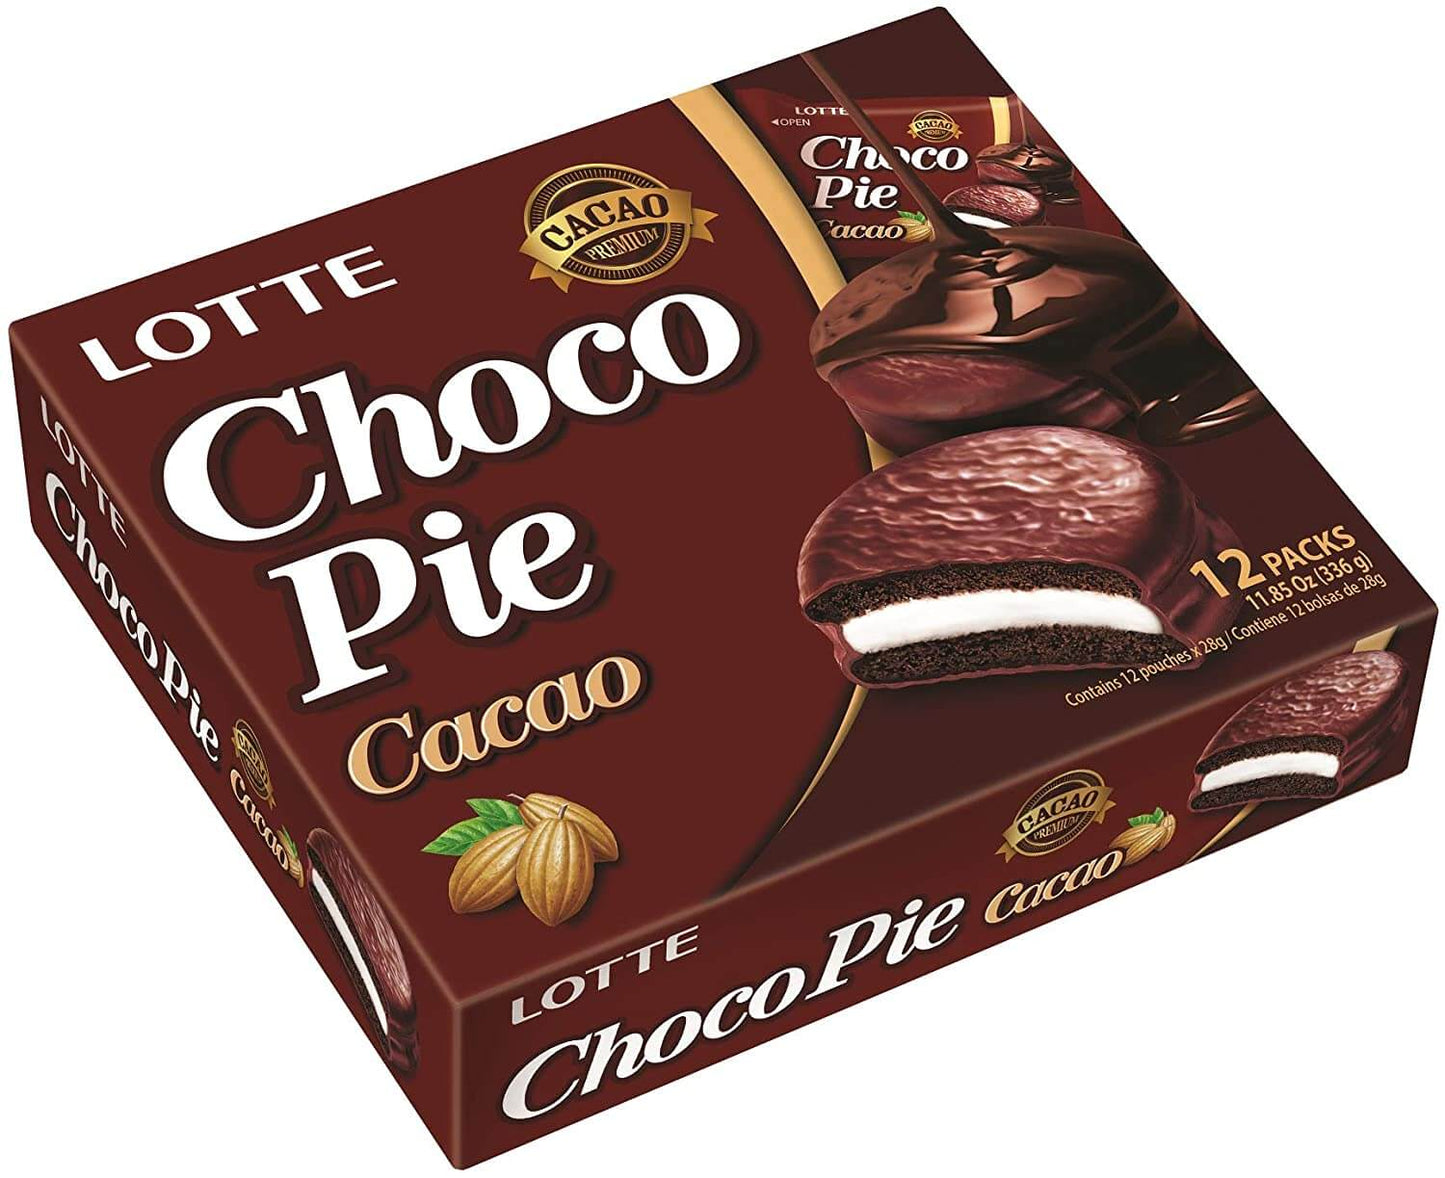 Lotte Choco Pie Cacao Flavour 12 Packs